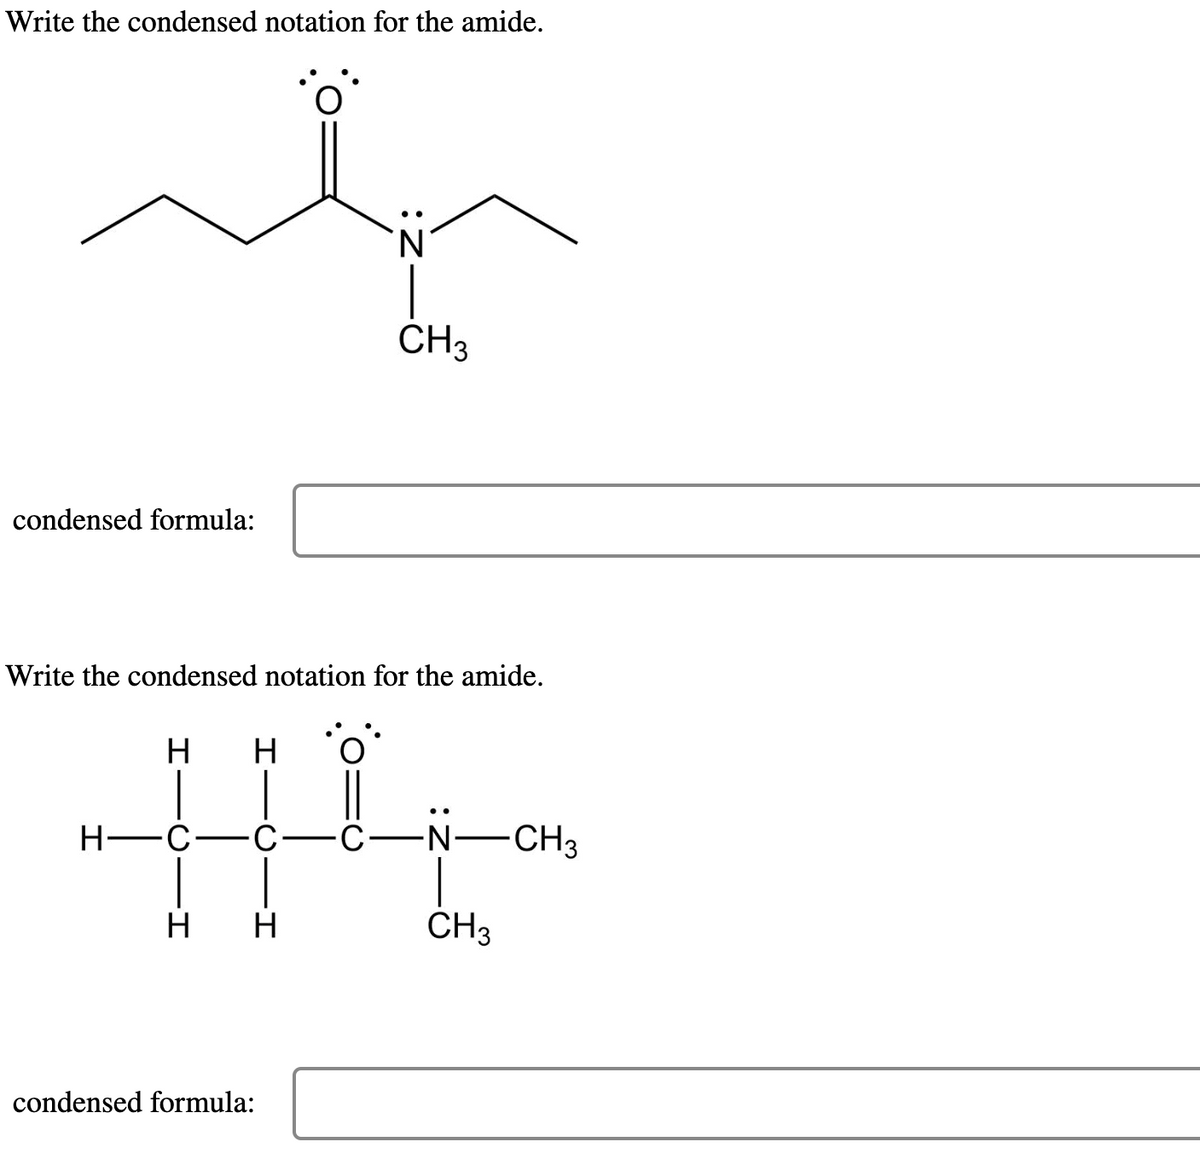 Write the condensed notation for the amide.
condensed formula:
Write the condensed notation for the amide.
H H
H-C
·C-C-
H H
CH3
condensed formula:
-N-CH3
CH3